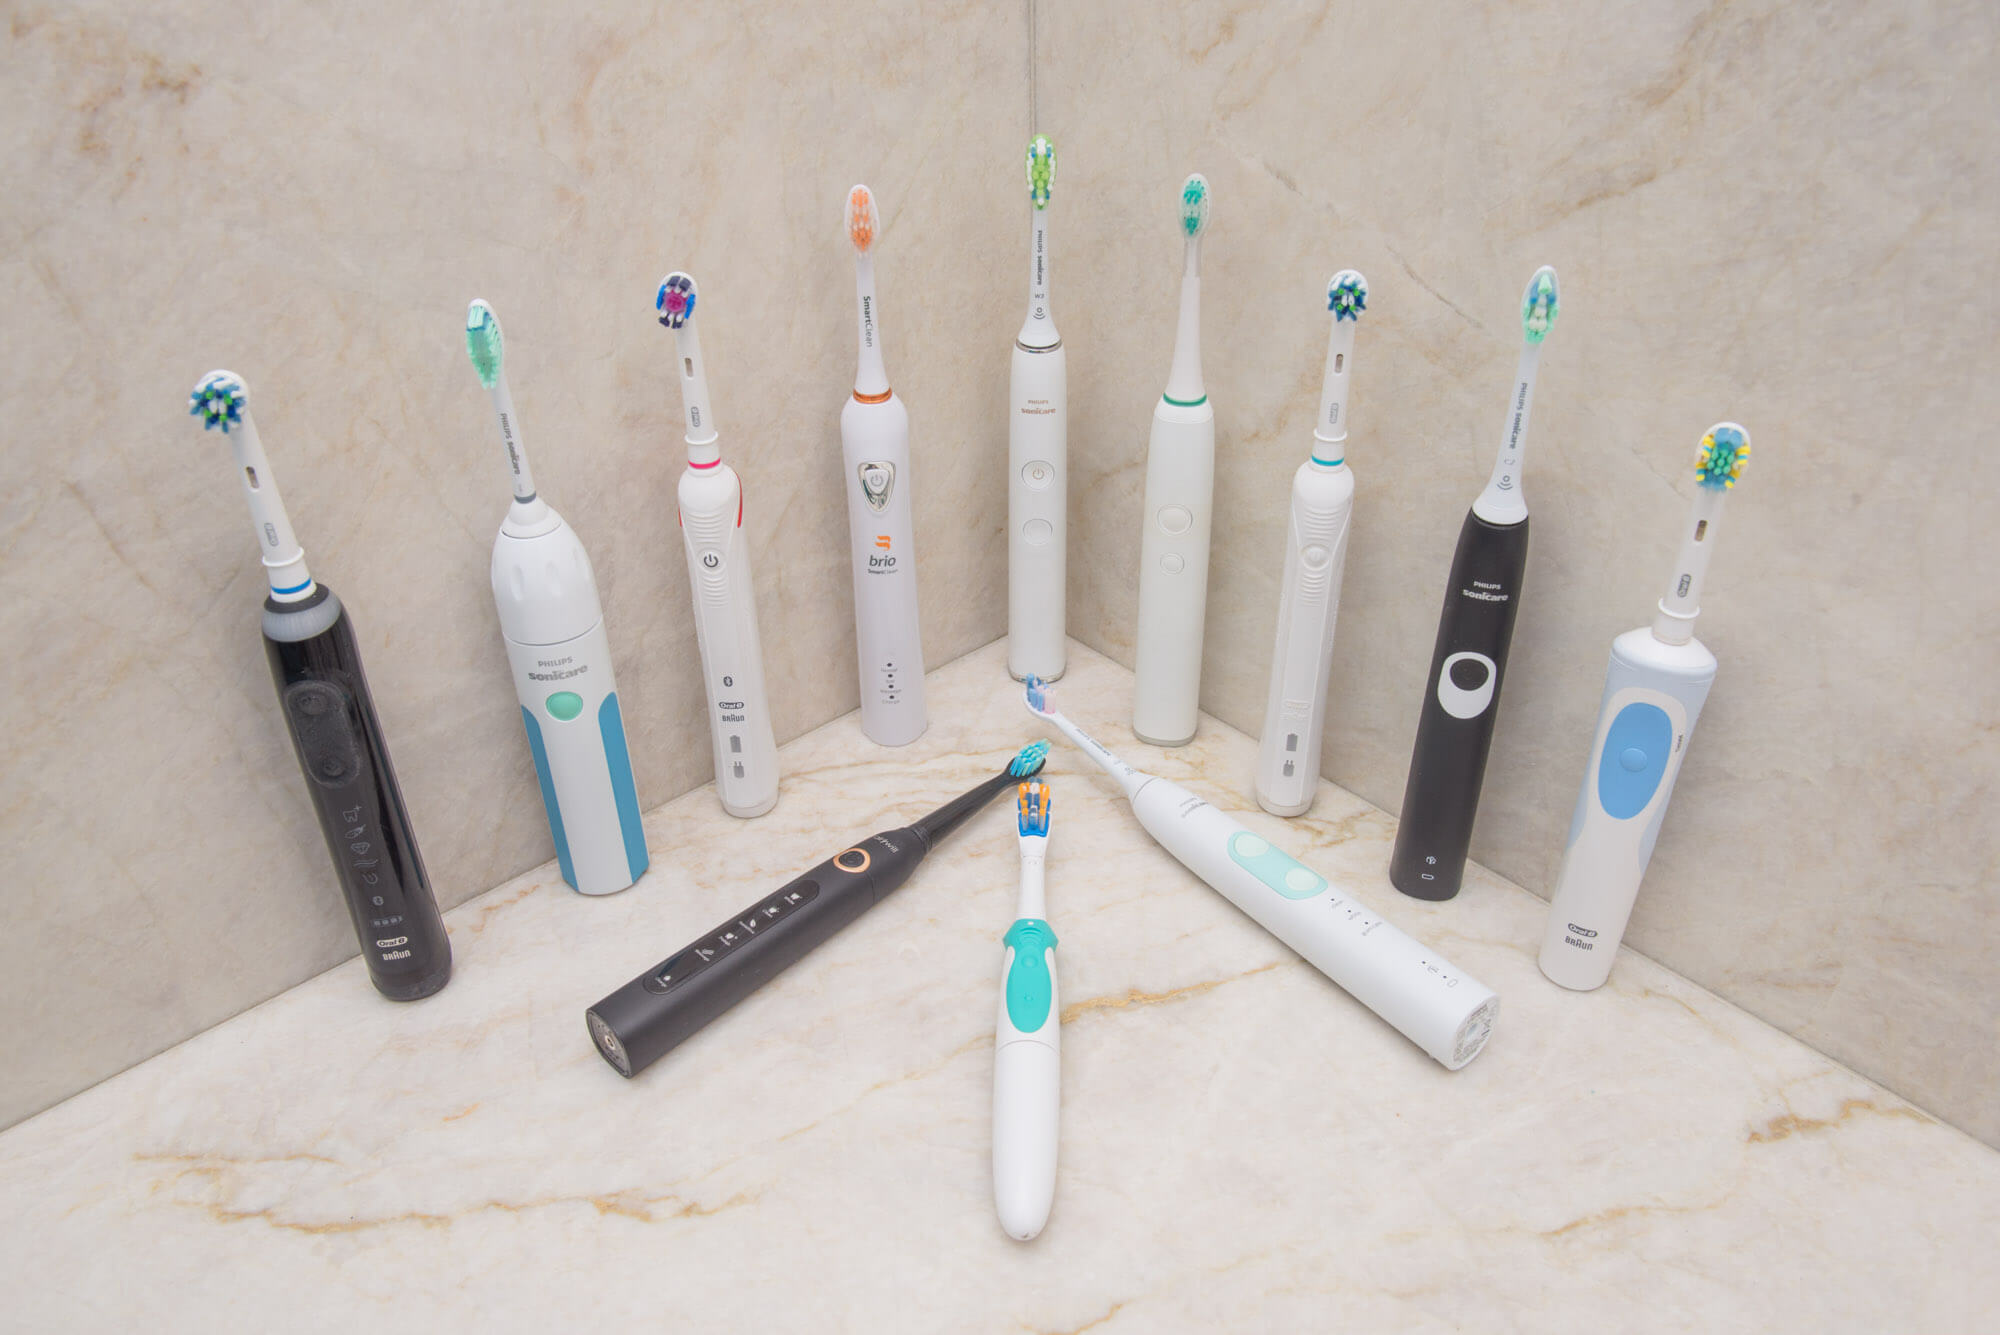 Philips One Rechargeable Toothbrush Review: Best Travel Toothbrush